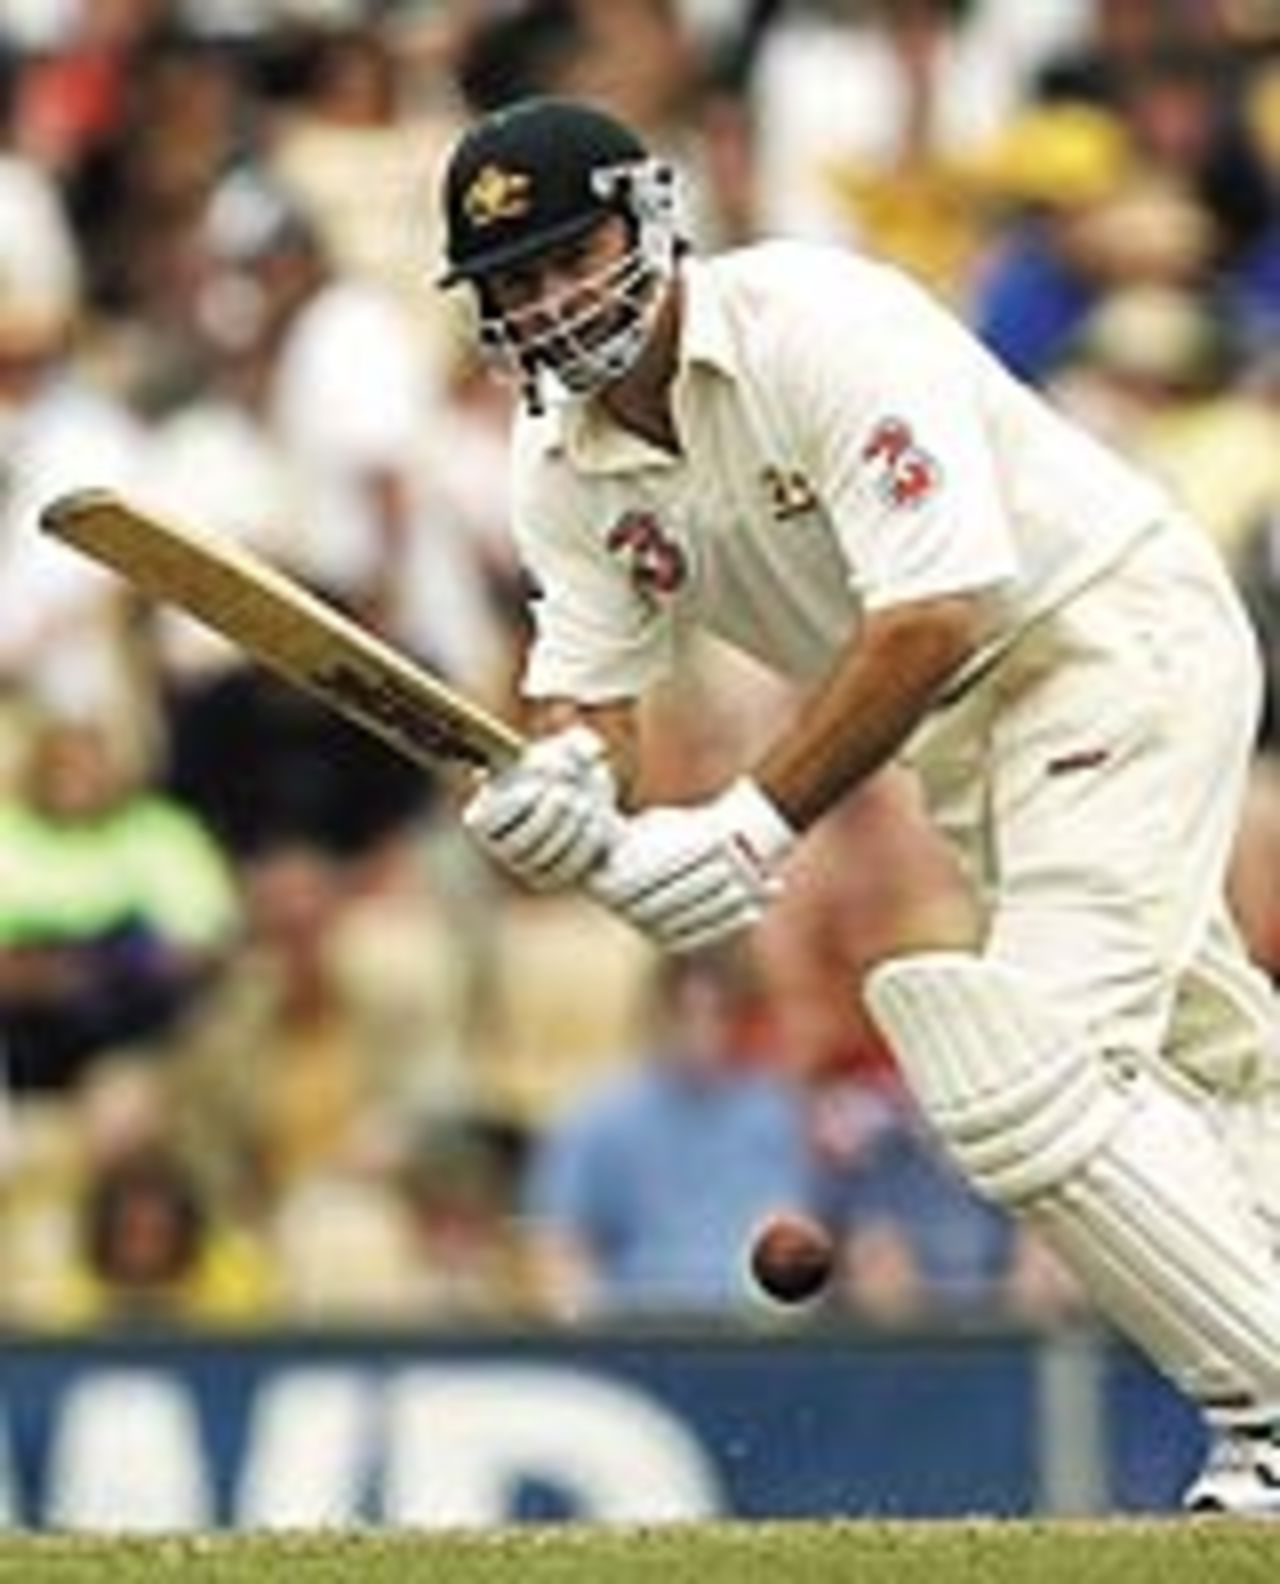 Steve Waugh playes his trademark flick shot, Australia v India, 4th Test, Sydney, 5th day, January 6, 2004